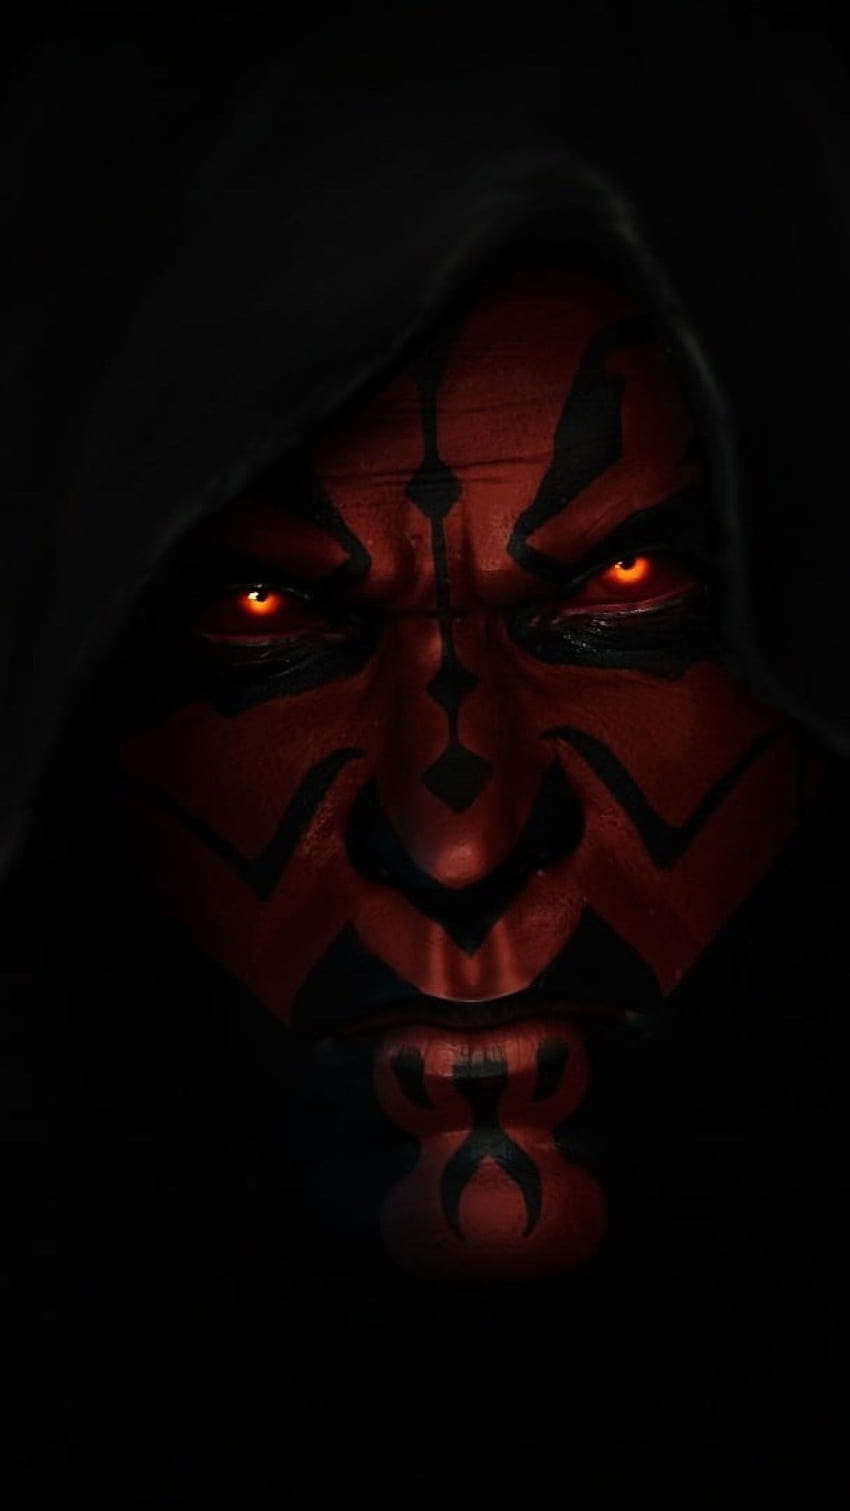 Person wearing hood , Star Wars, Darth Maul, A Sith Lord • For You For & Mobile, darth maul star wars franchise HD phone wallpaper